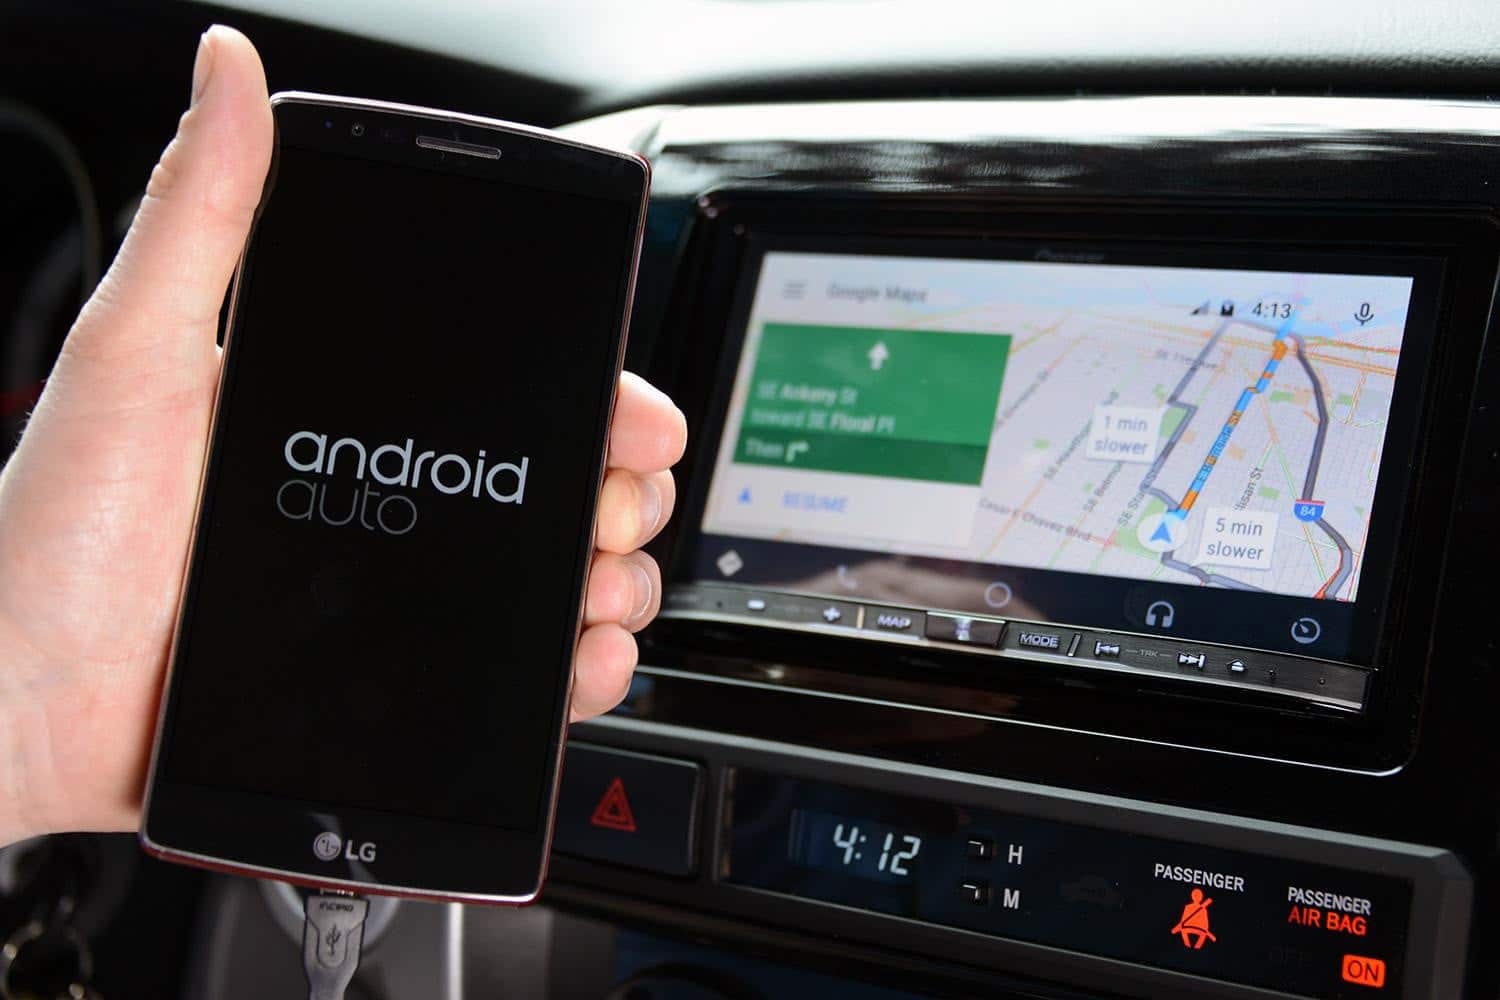 How to connect to Android Auto